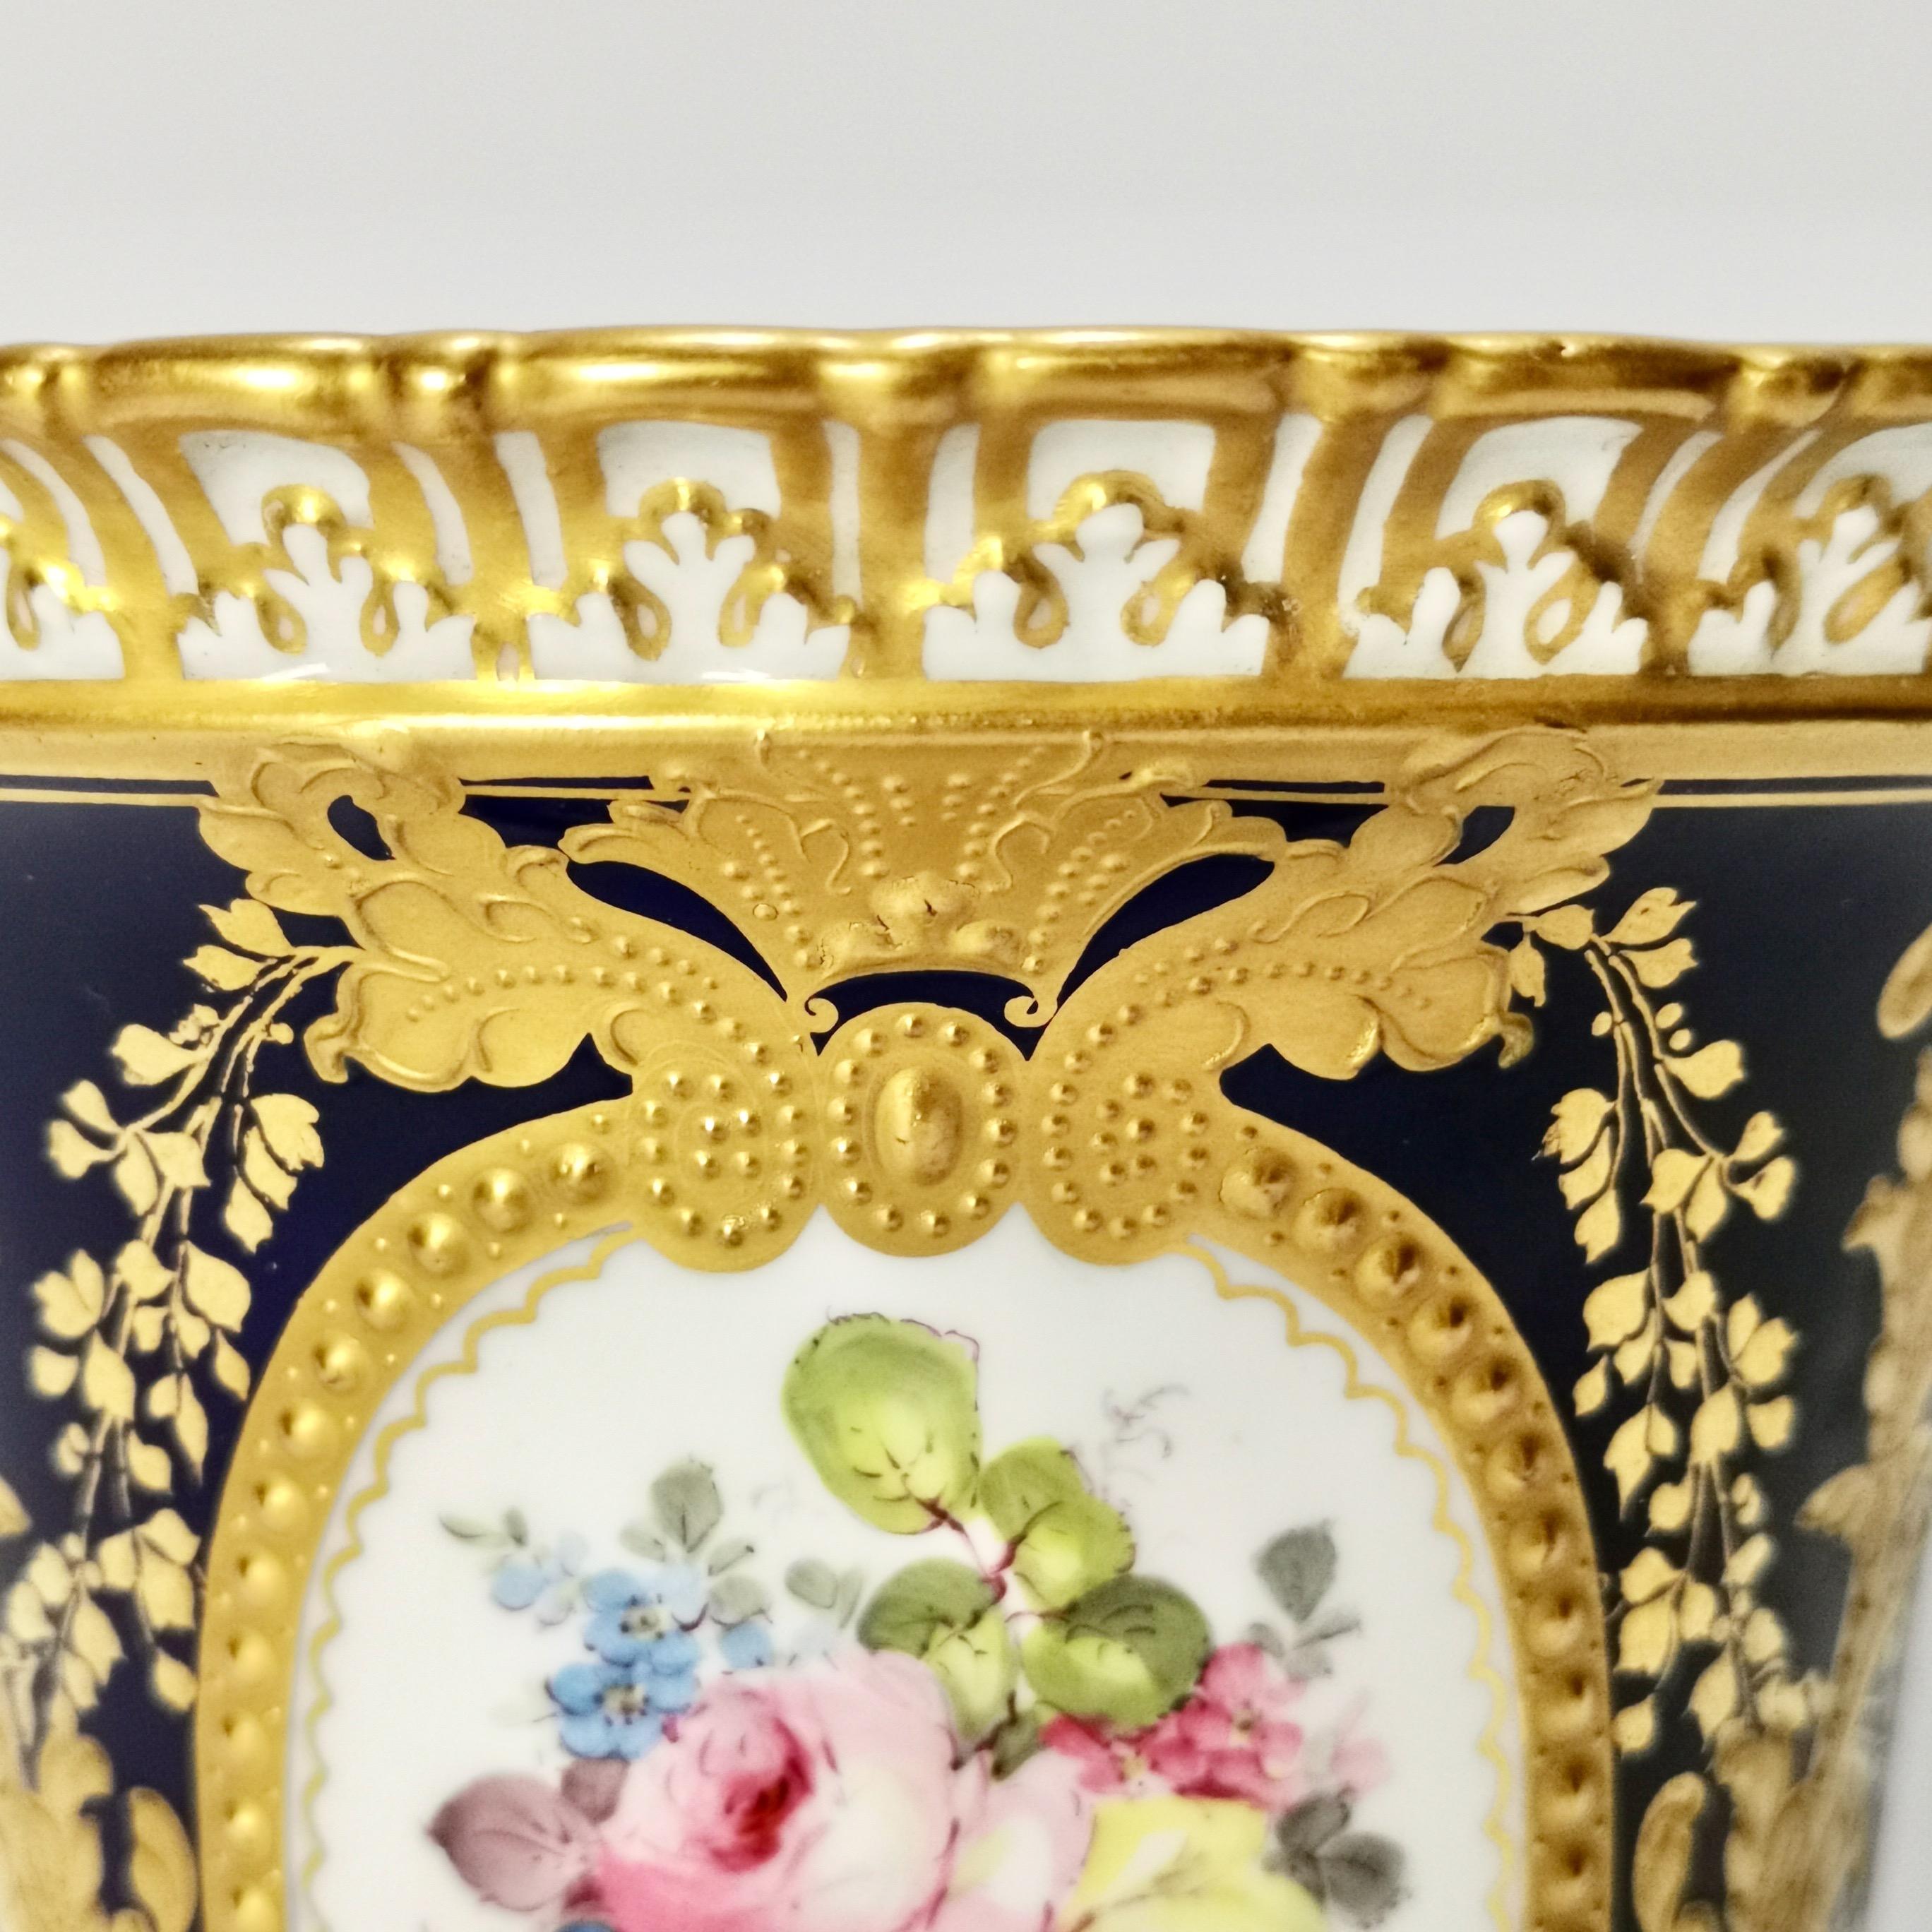 Royal Crown Derby Porcelain Campana Vase, Cobalt Blue, Flowers by C Gresley 1916 In Good Condition For Sale In London, GB